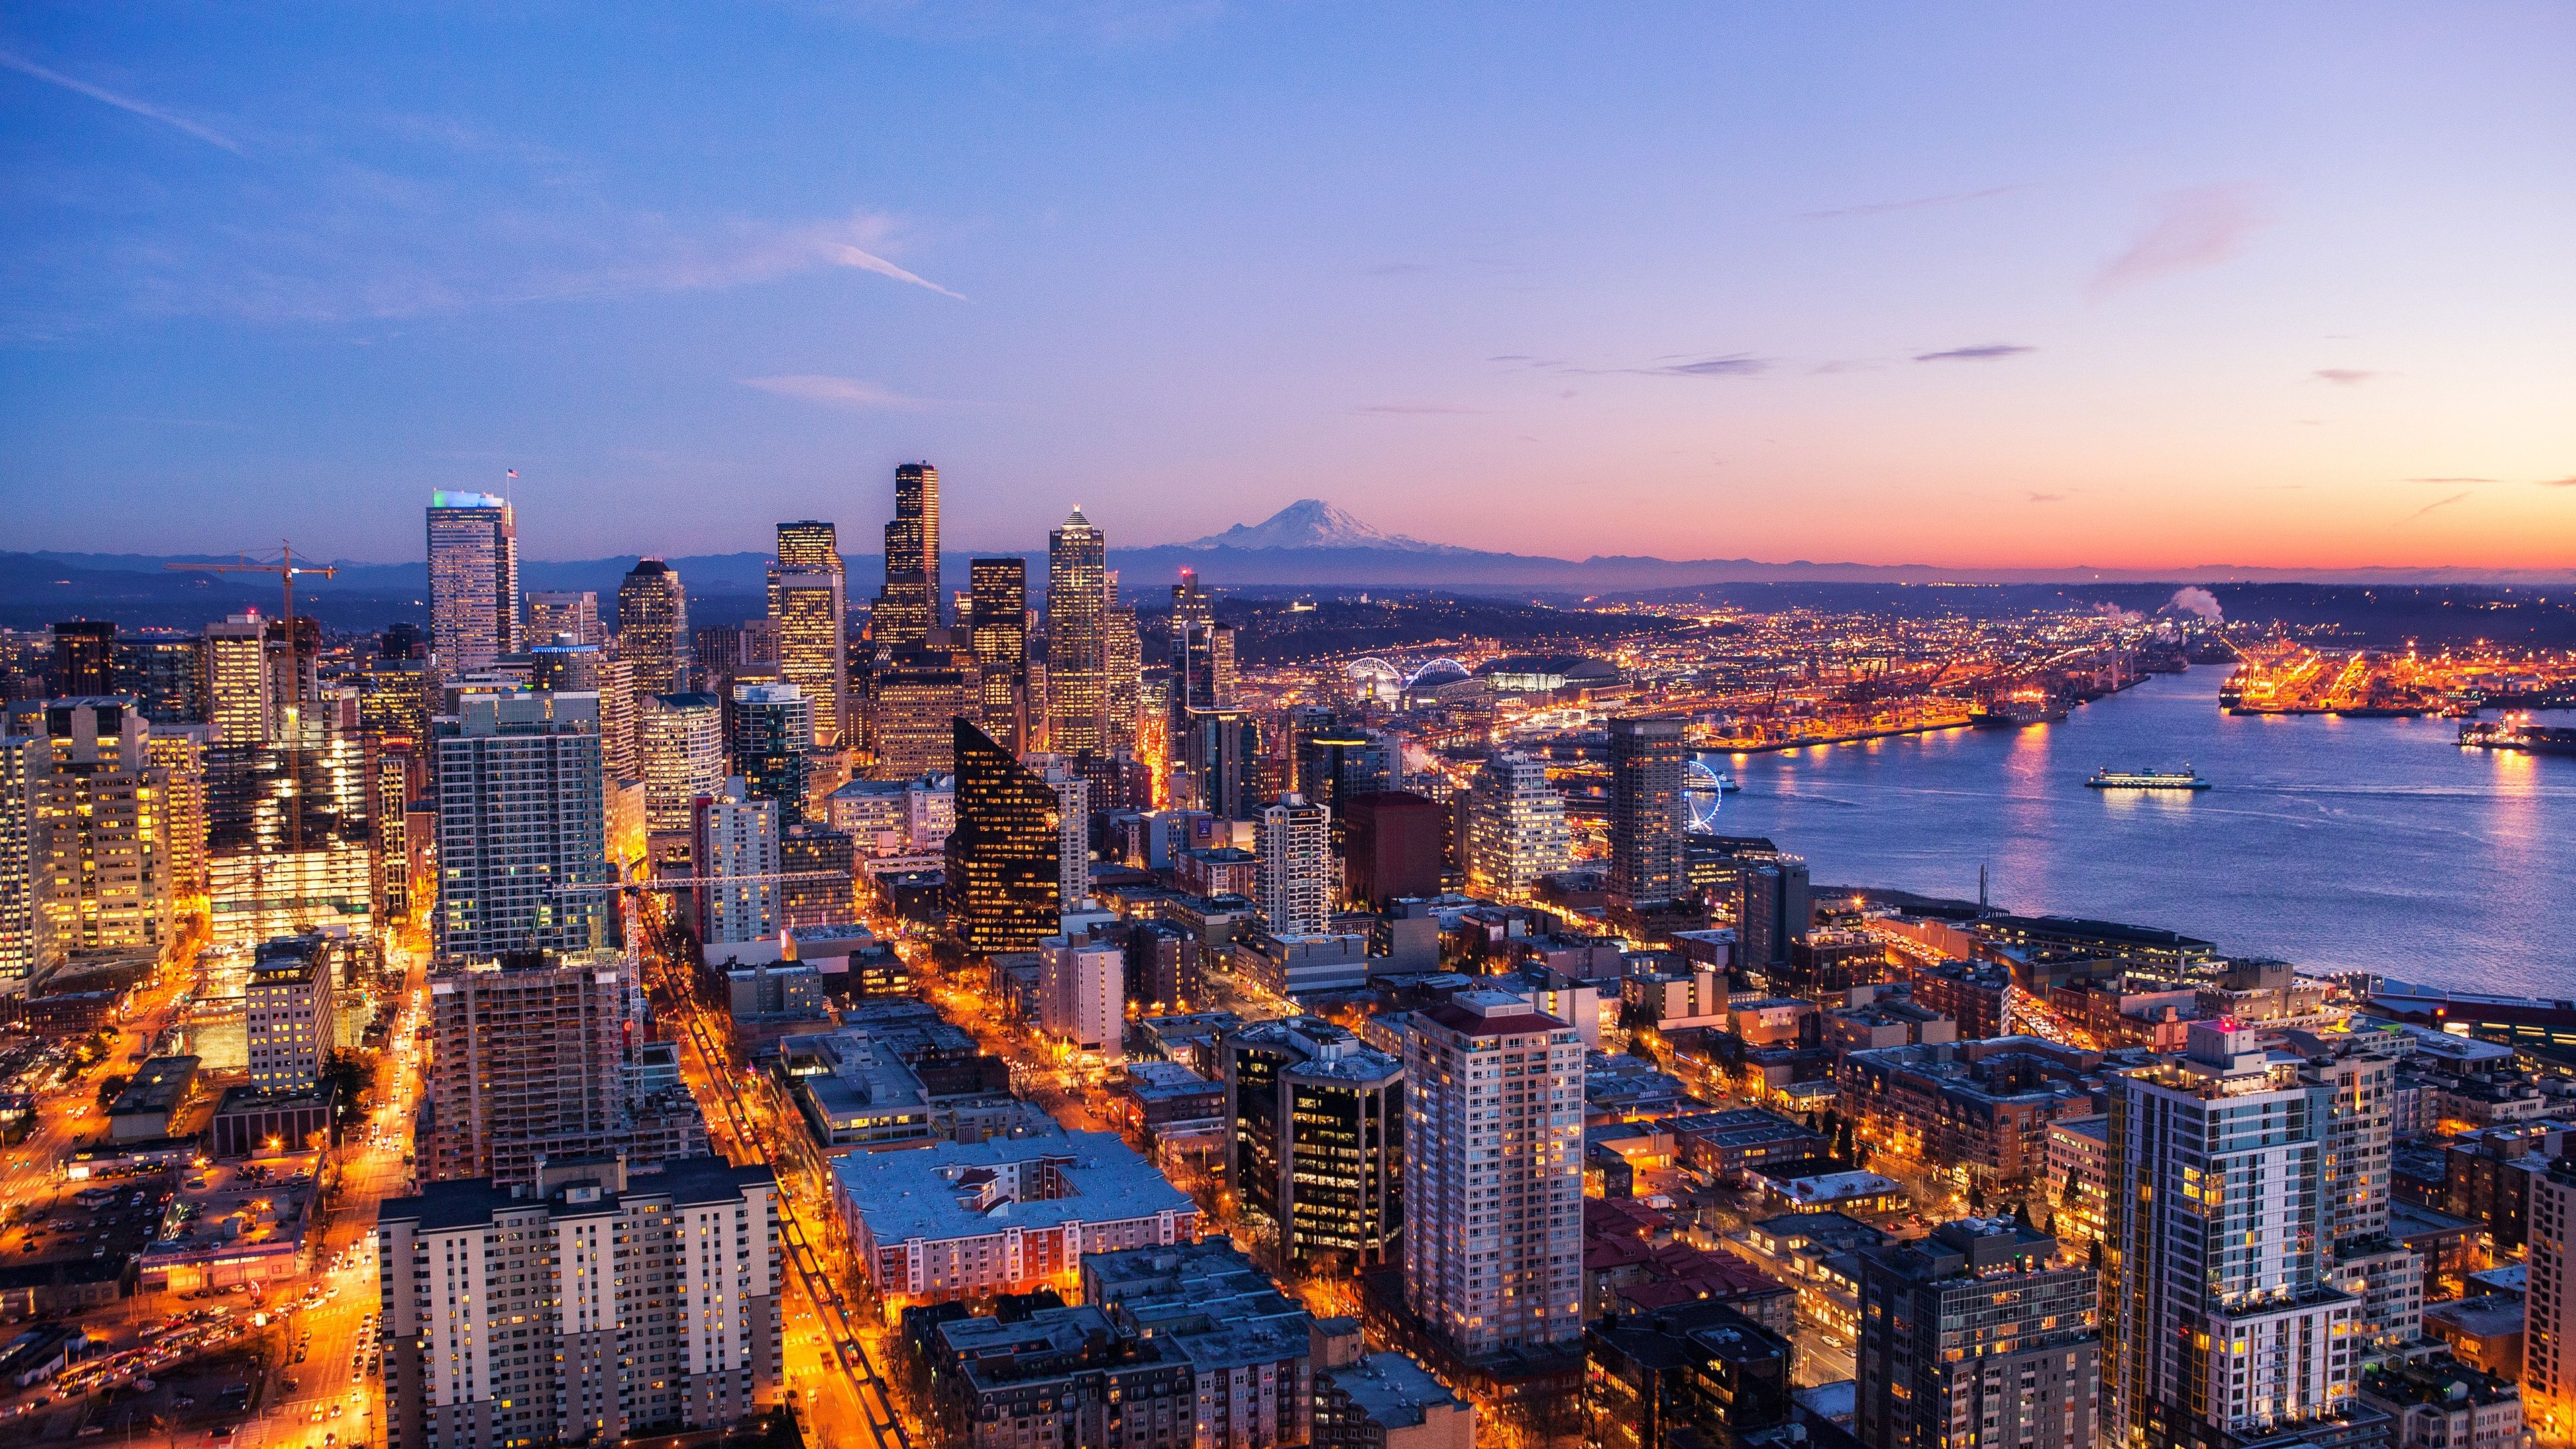 Skyline: A dusk time view of Seattle from the Space Needle observation tower, Washington State. 3840x2160 4K Wallpaper.